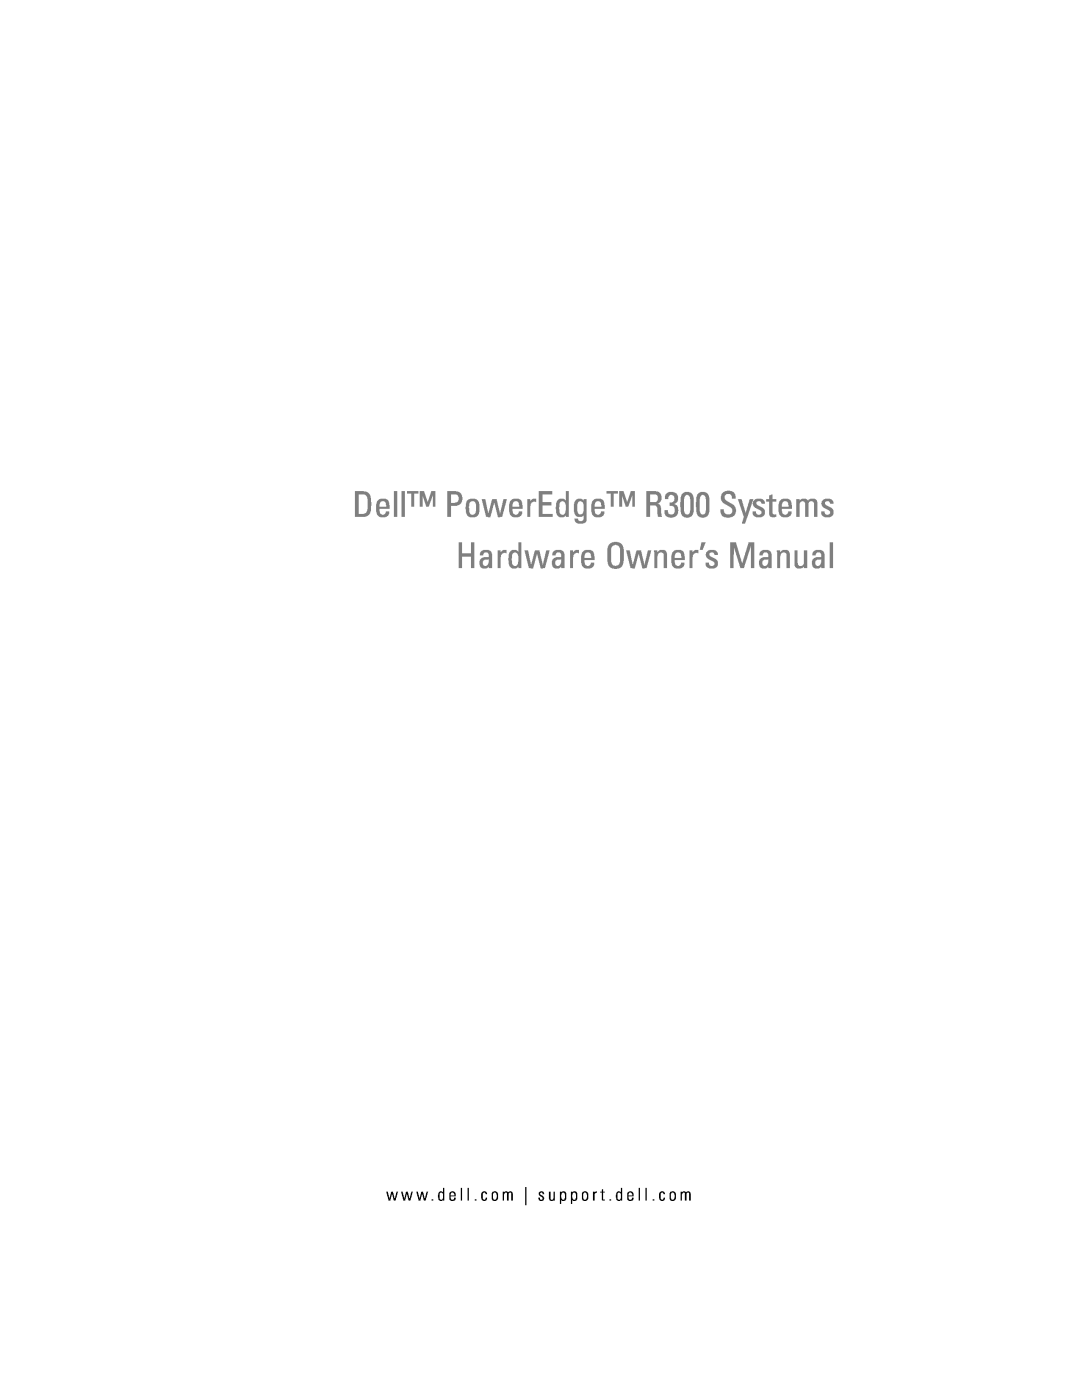 Dell owner manual Dell PowerEdge R300 Systems Hardware Owner’s Manual 